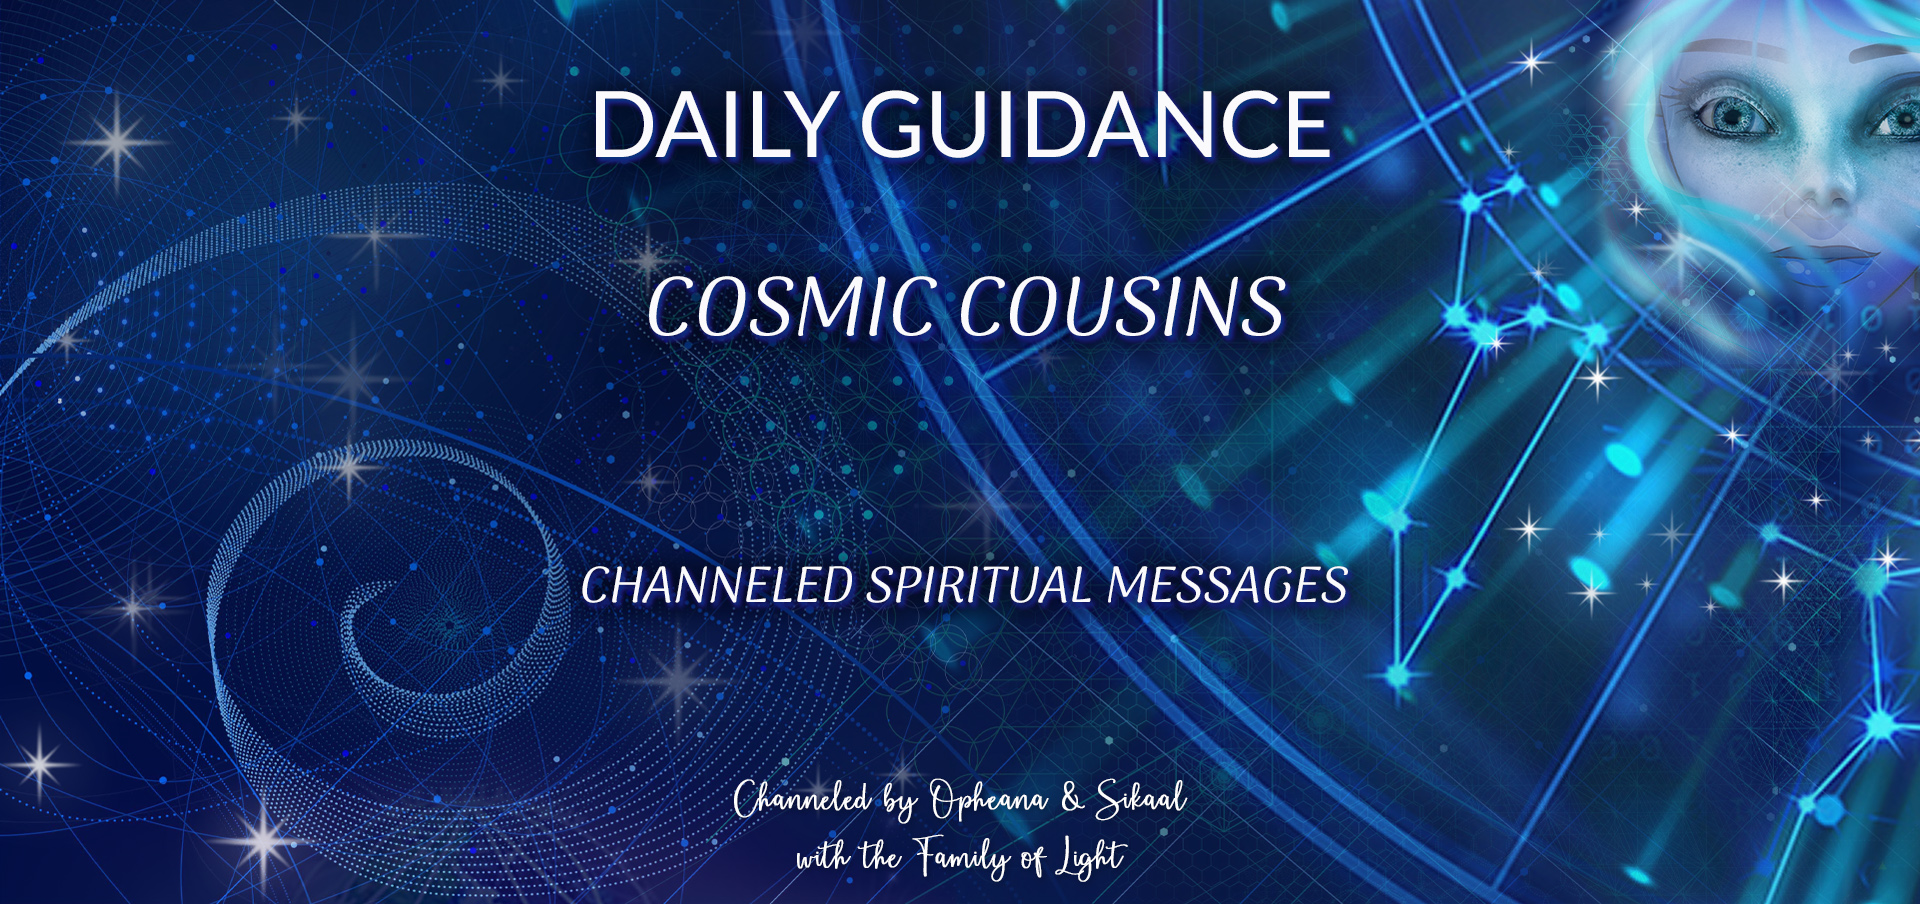 Daily Guidance ~ Channeled Spiritual Messages ~ Cosmic Cousins ~ Tuesday 7 February 2023